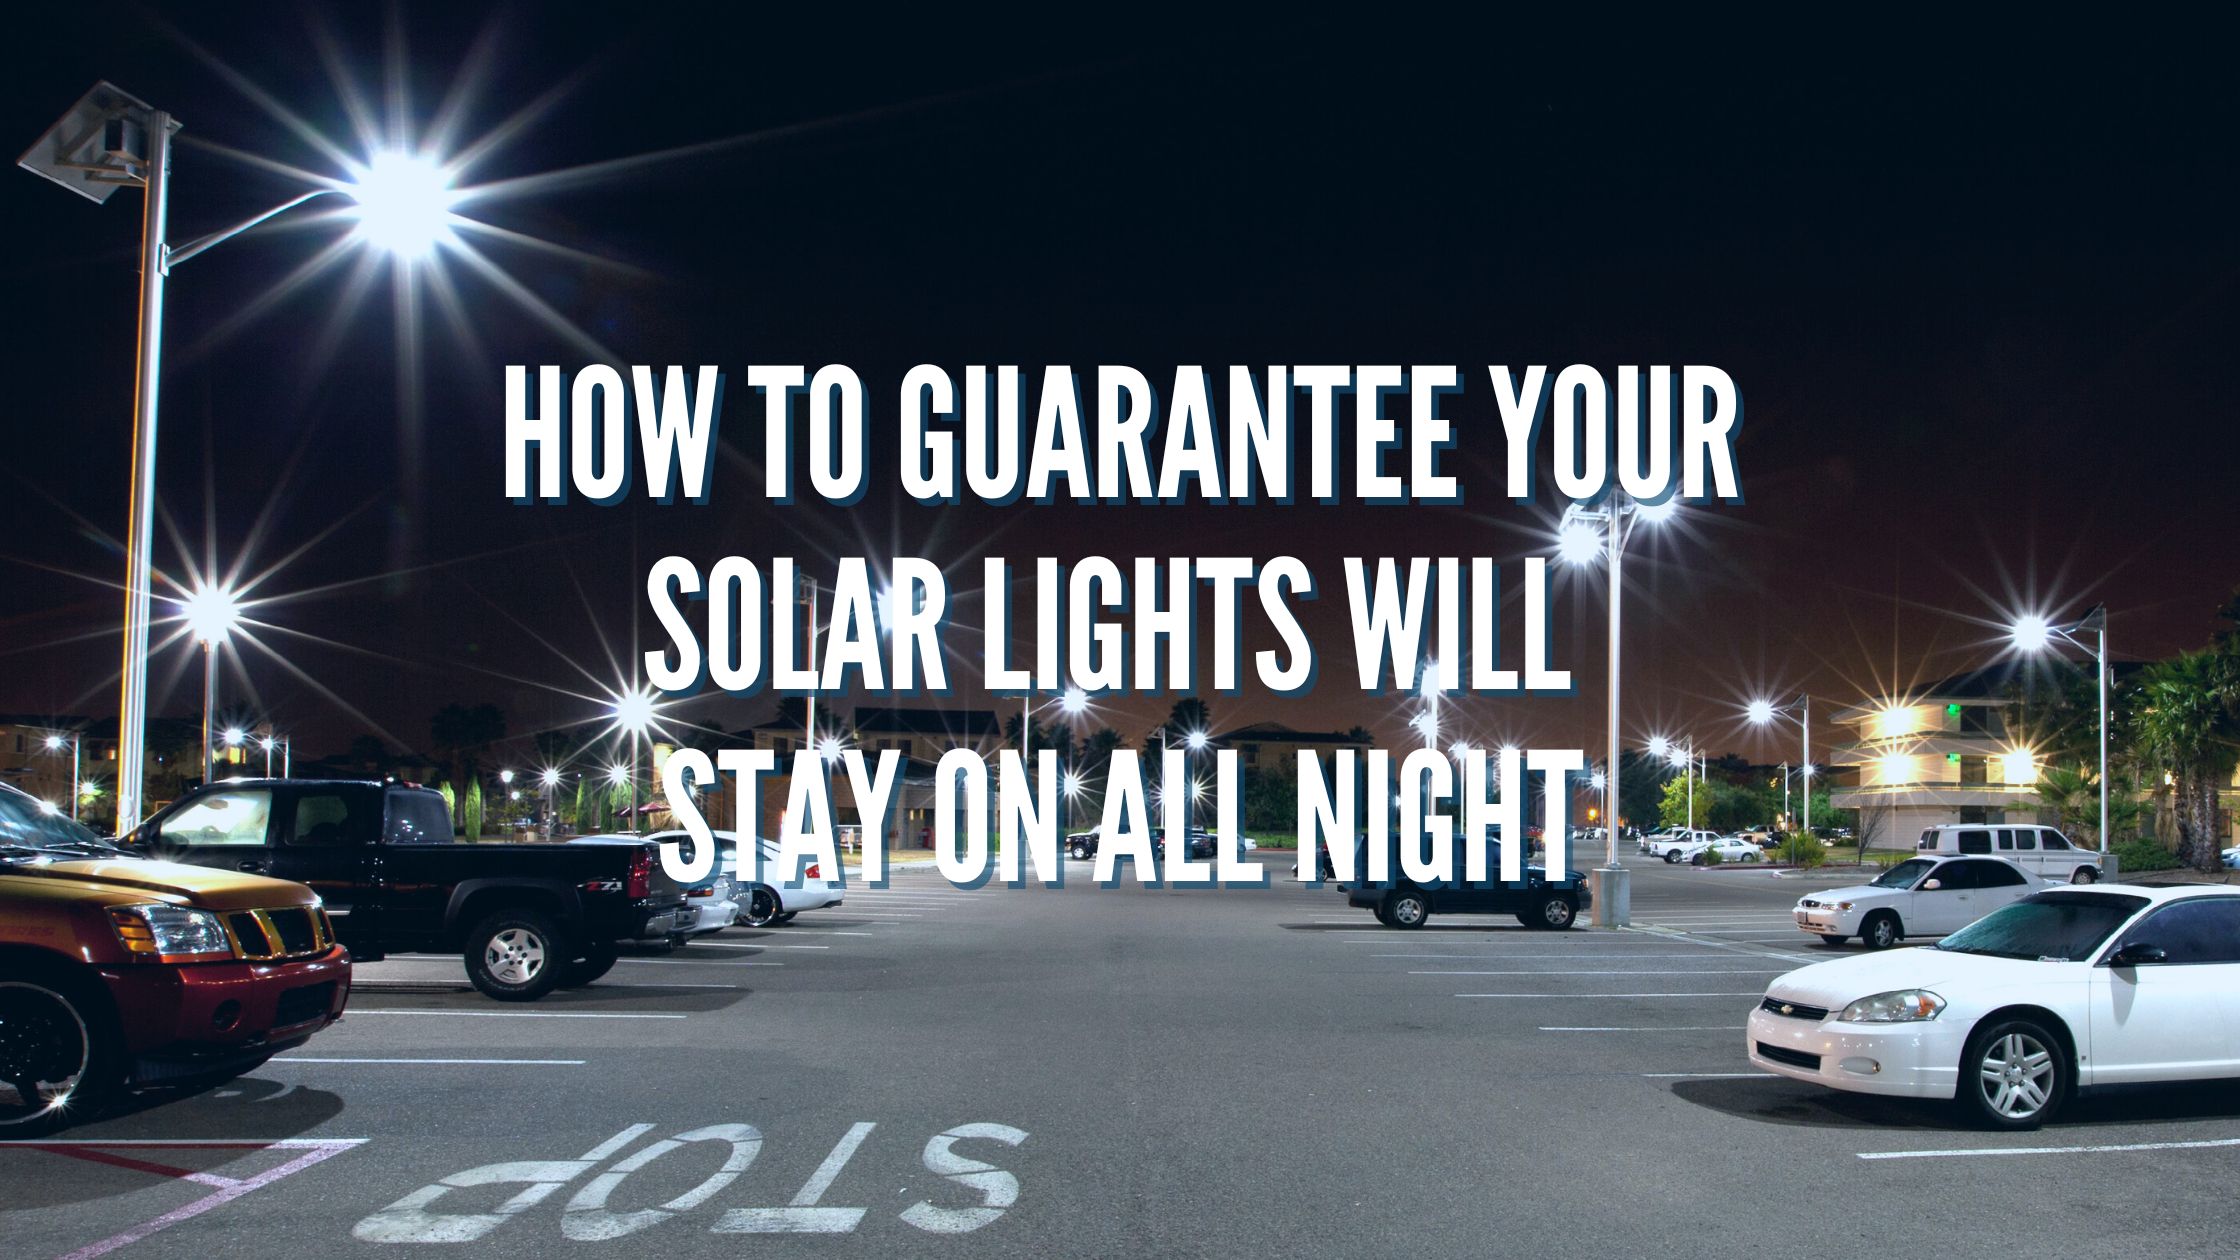 How to Guarantee Your Solar Lights will Stay On All Night